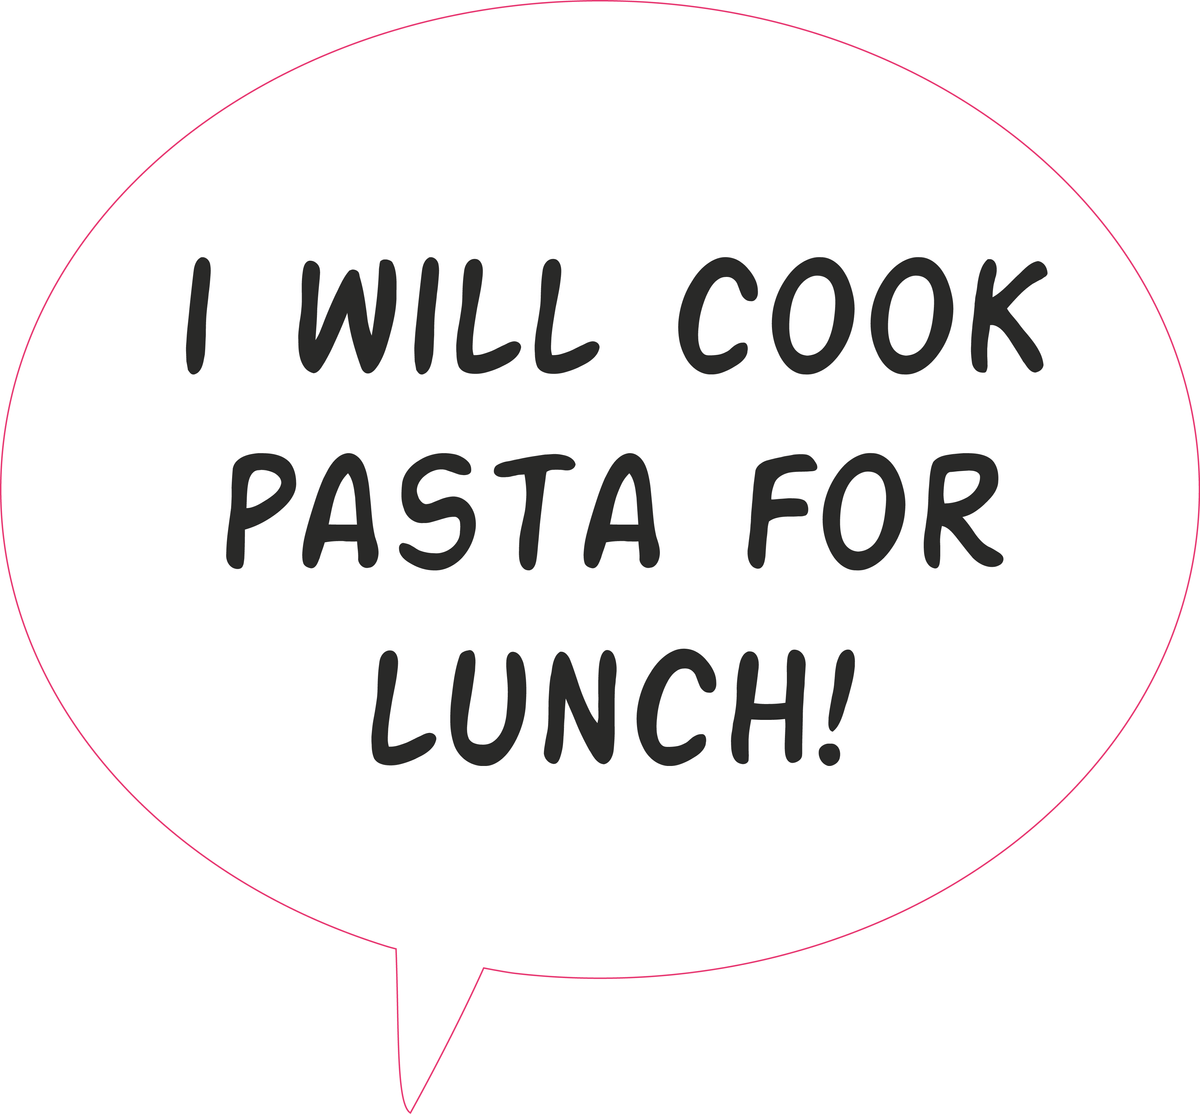 I will cook pasta for lunch